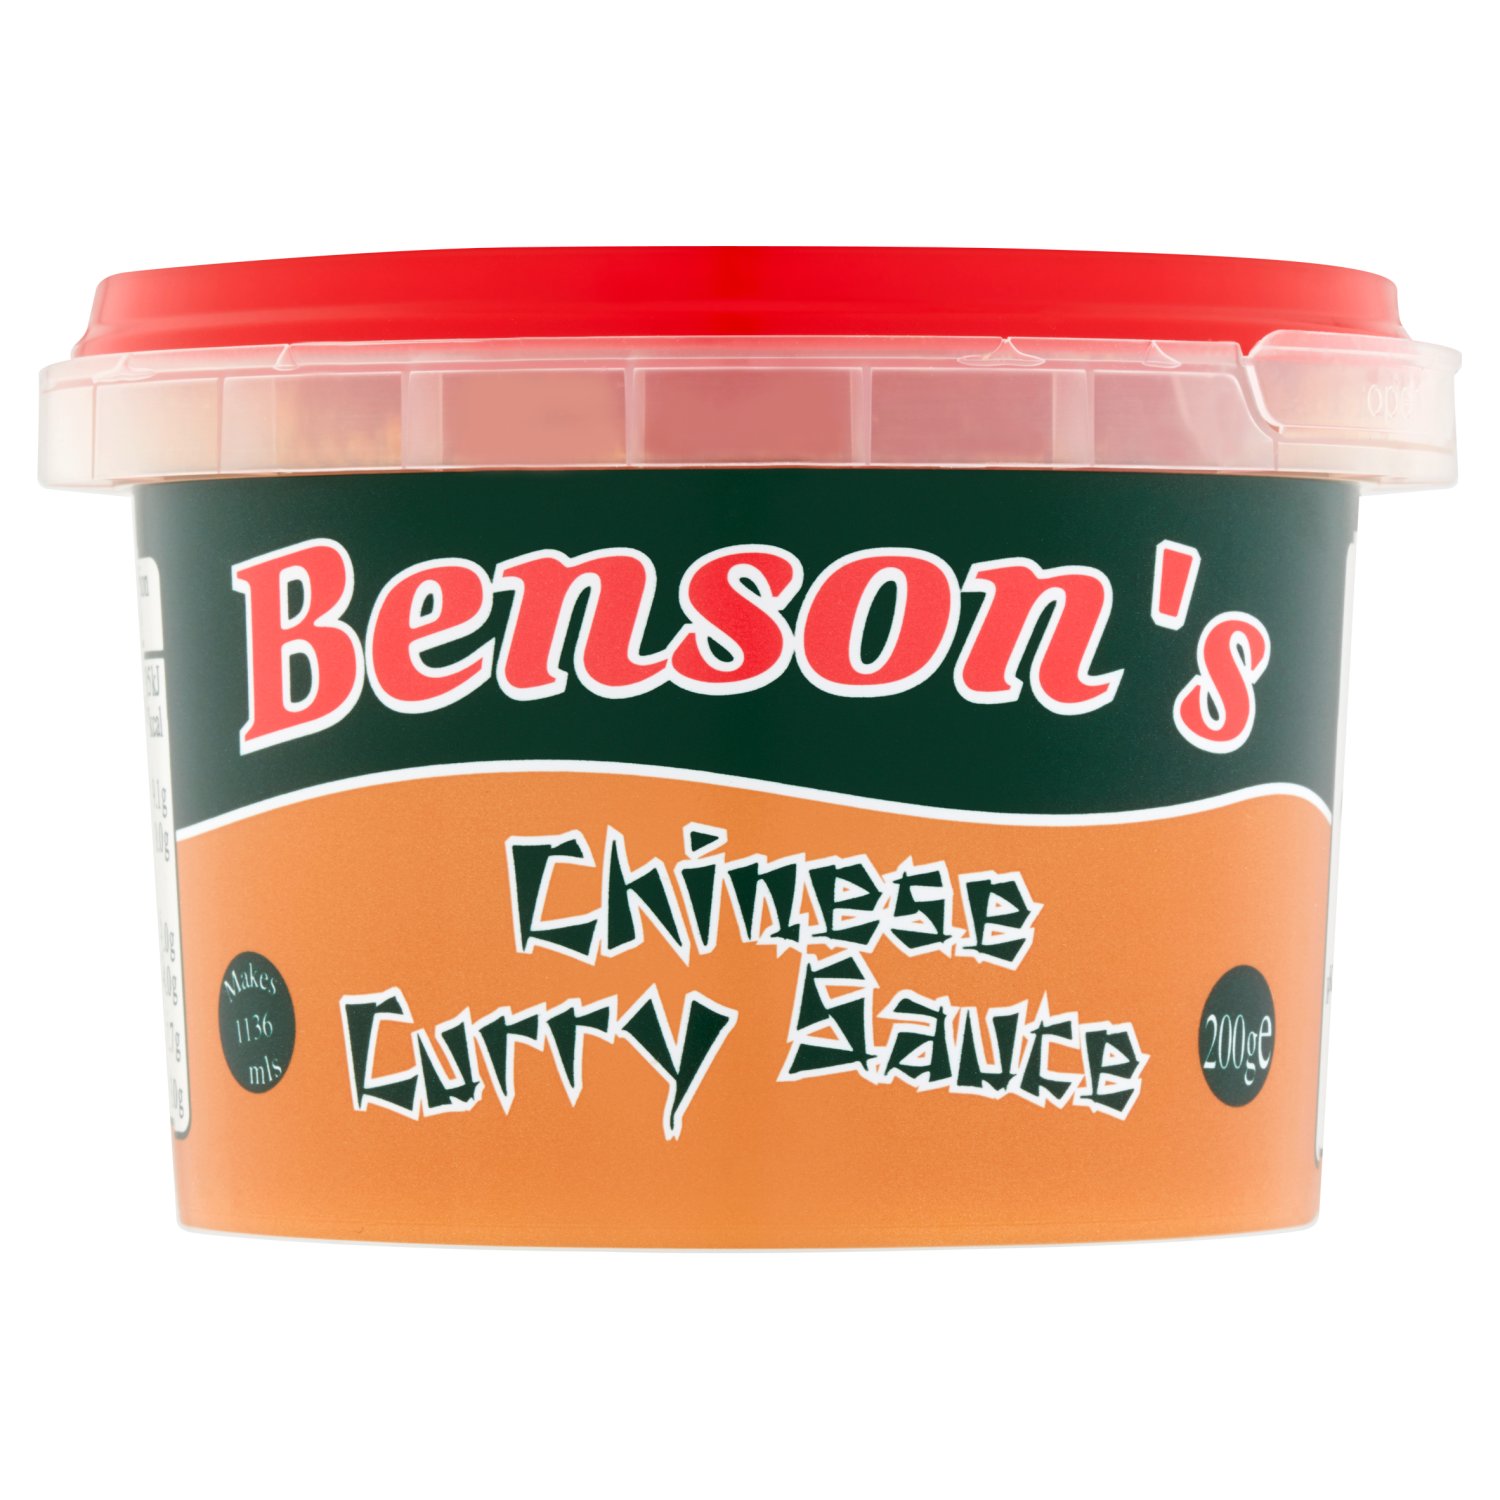 Bensons Chinese Curry Sauce (200 g)